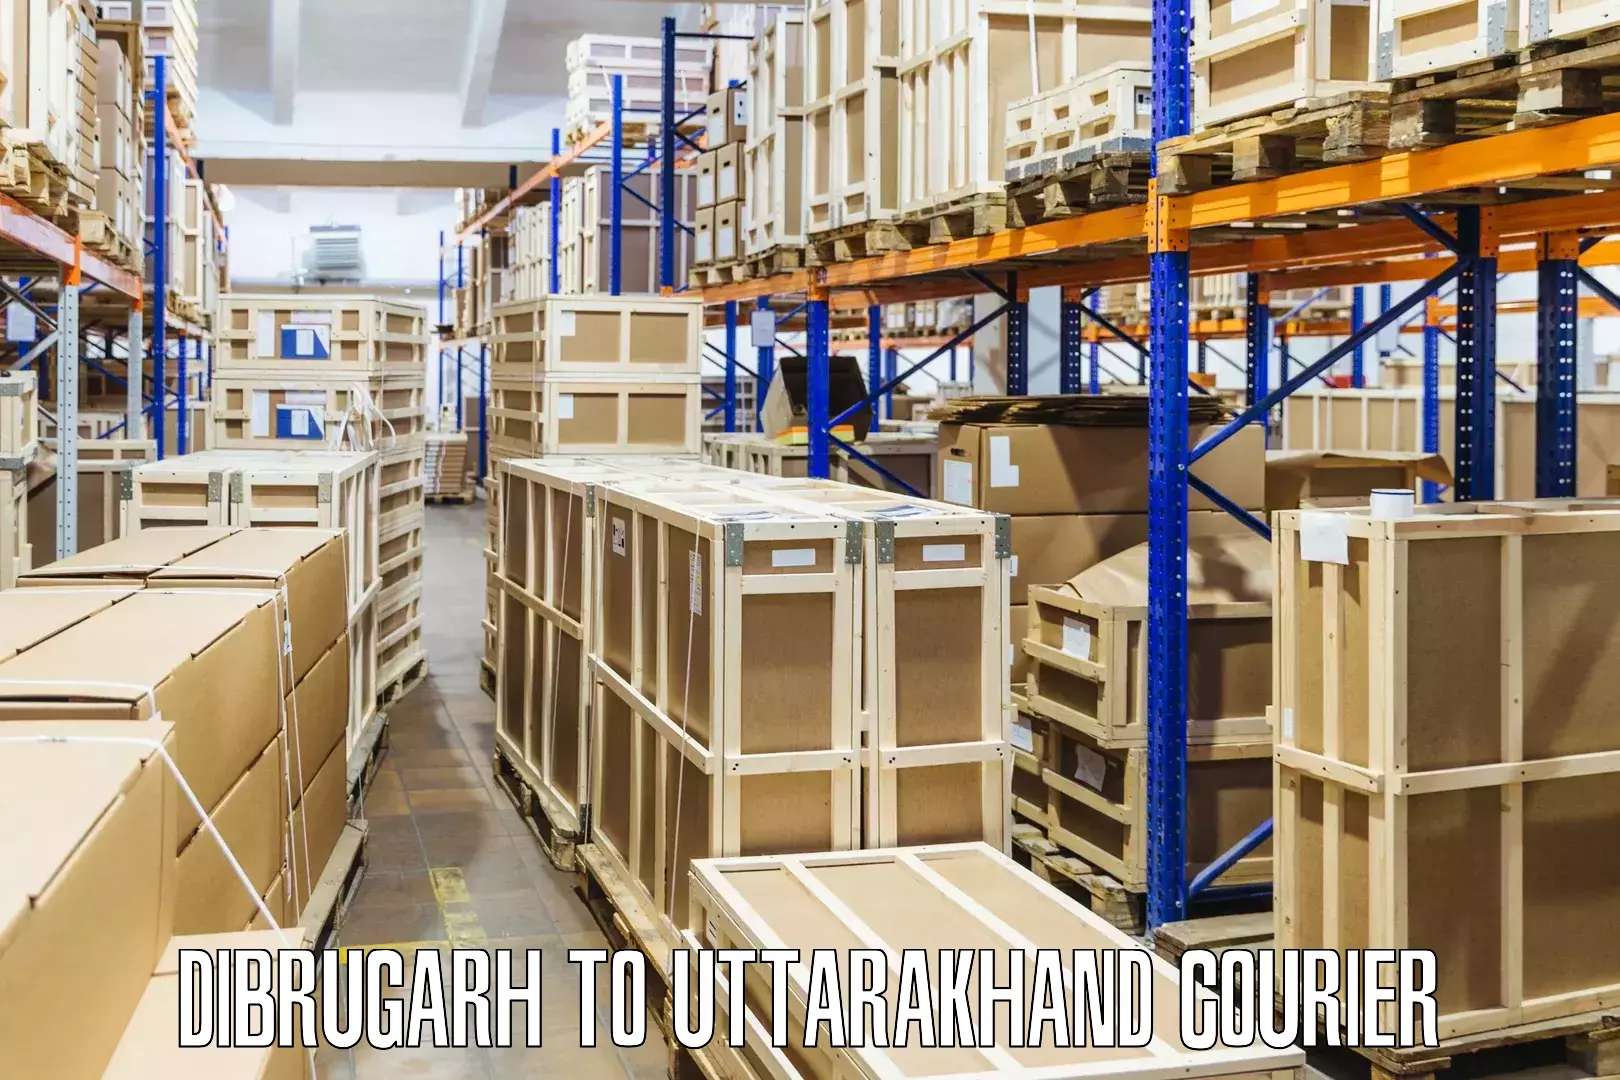 Tech-enabled shipping Dibrugarh to Rudrapur